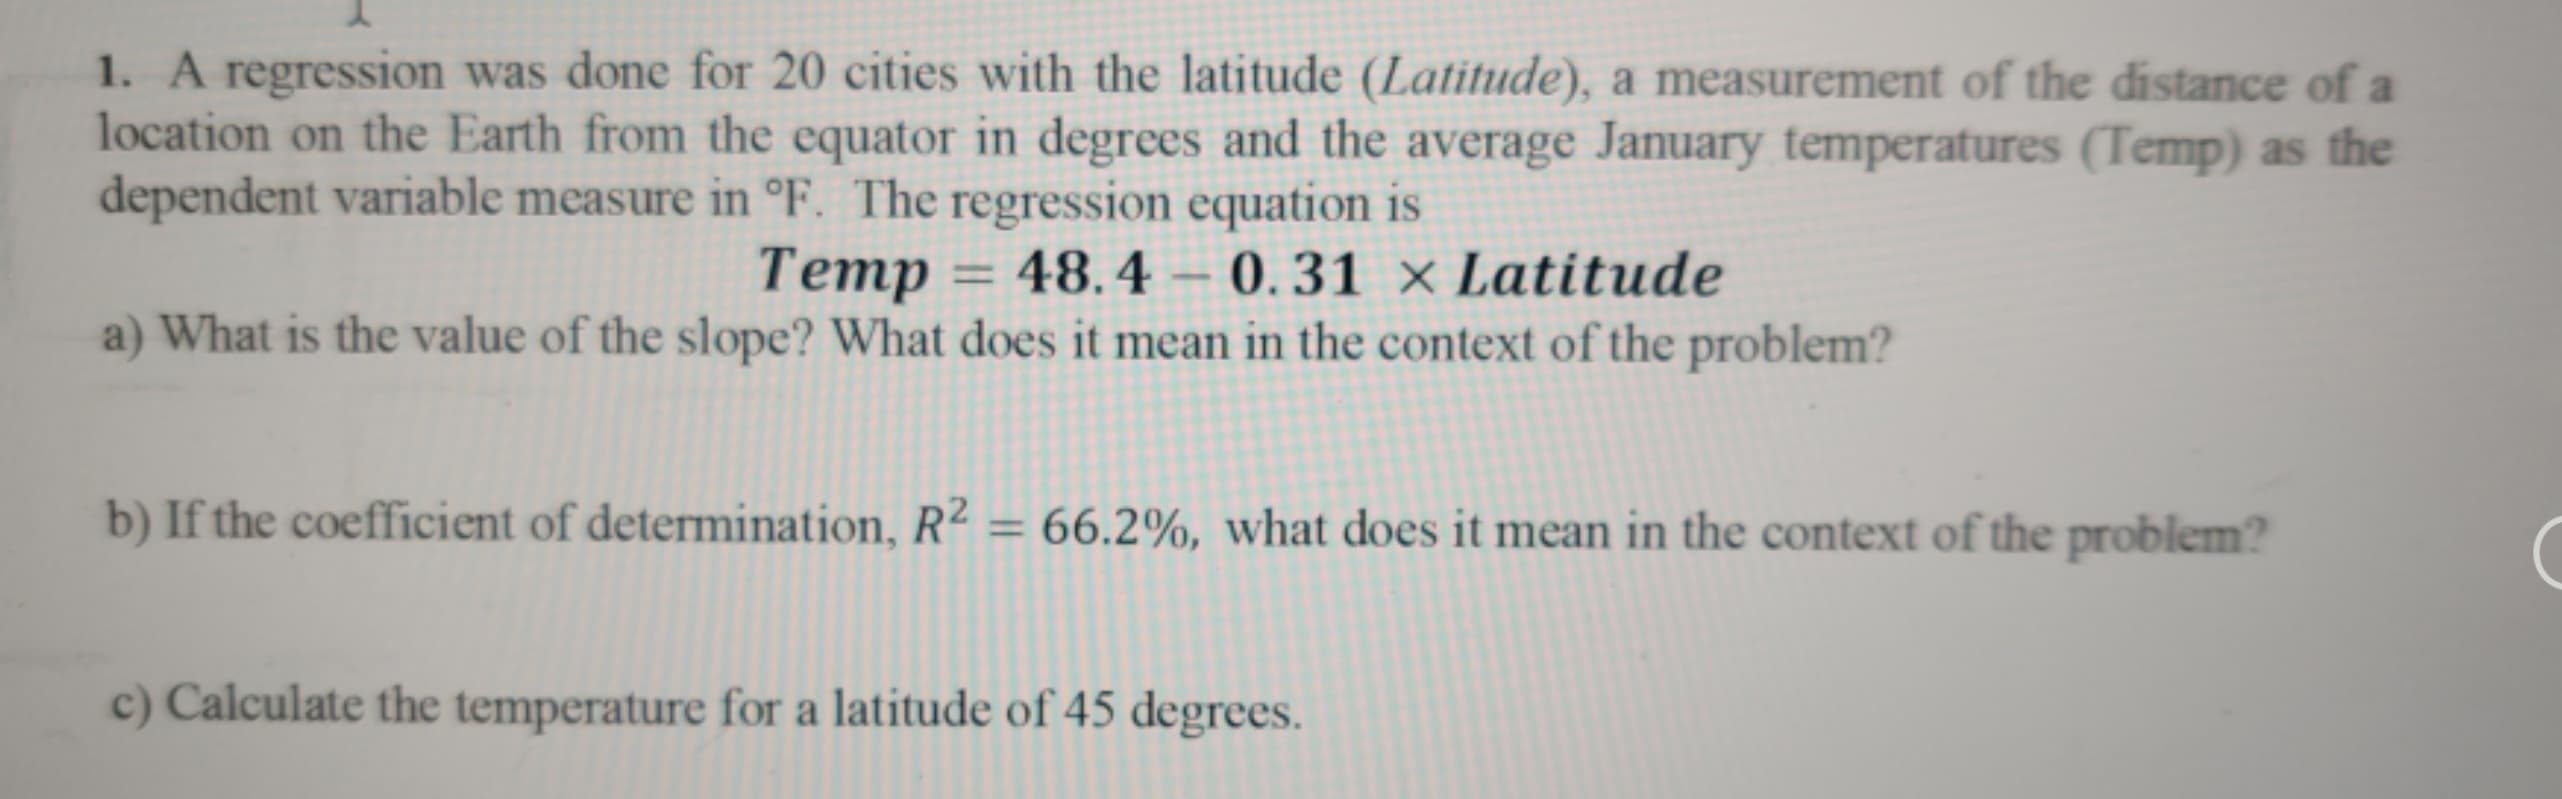 1. A regression was done for 20 cities with the latitude (Latitude), a measurement of the distance of a
location on the Earth from the equator in degrees and the average January temperatures (Temp) as the
dependent variable measure in °F. The regression equation is
Temp = 48.4 – 0.31 × Latitude
a) What is the value of the slope? What does it mean in the context of the problem?
%3D
b) If the coefficient of determination, R² = 66.2%, what does it mean in the context of the problem?
%3D
c) Calculate the temperature for a latitude of 45 degrees.
